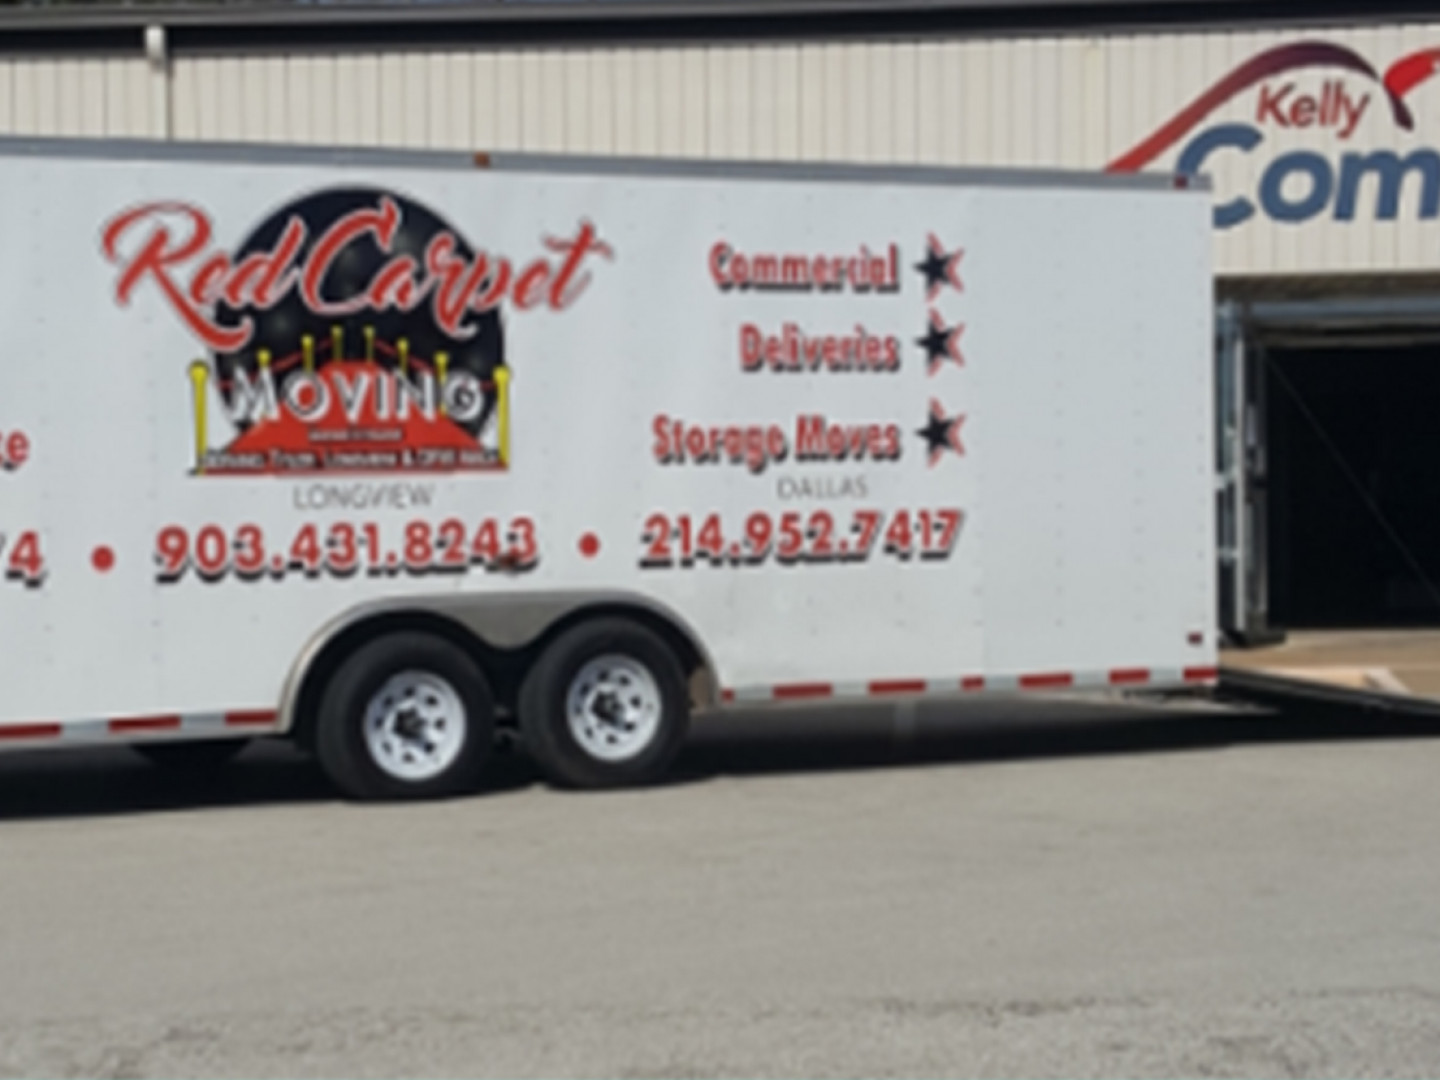 Red Carpet moving can help your move run smoothly in multiple areas.